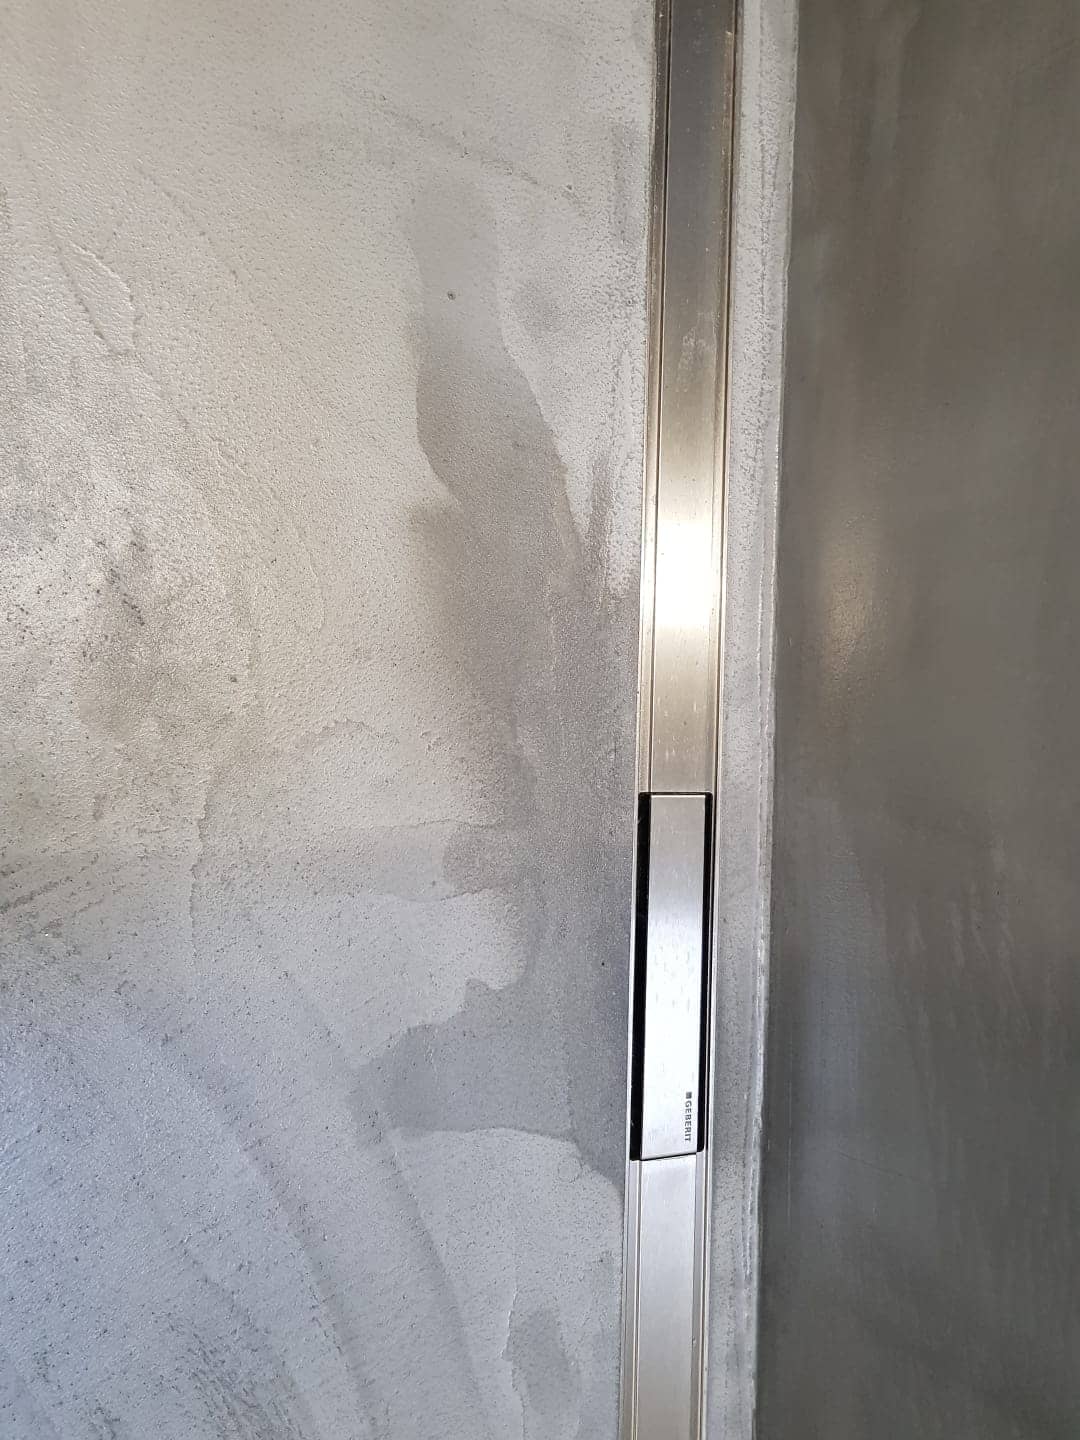   Microcement and humidity in a shower